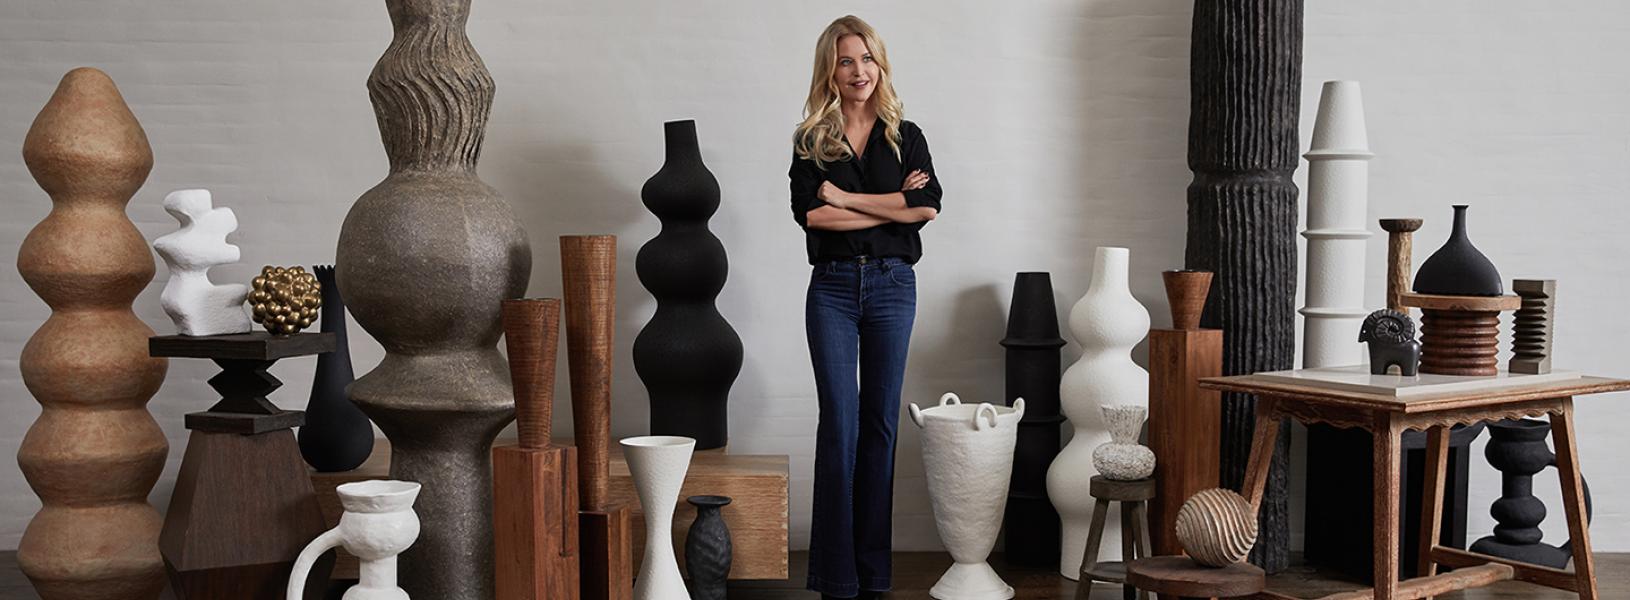 Christiane Lemieux standing with her arms crossed among very tall vases and objects d'art from her product collection.